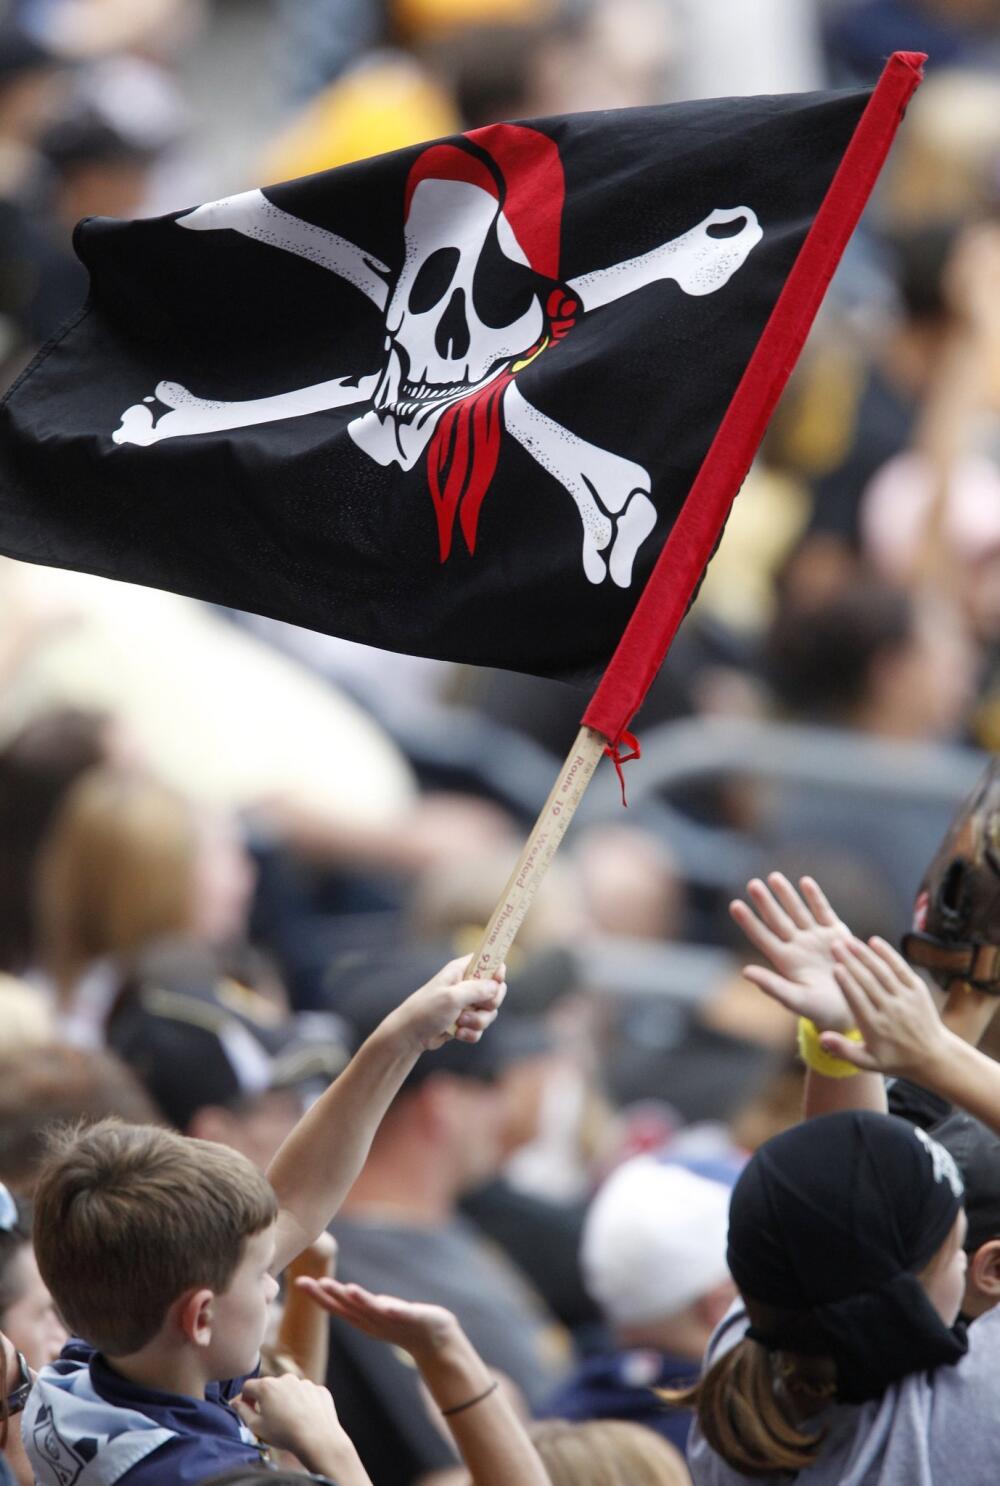 Pirates adopt gold 'P' as primary logo, replacing Jolly Roger